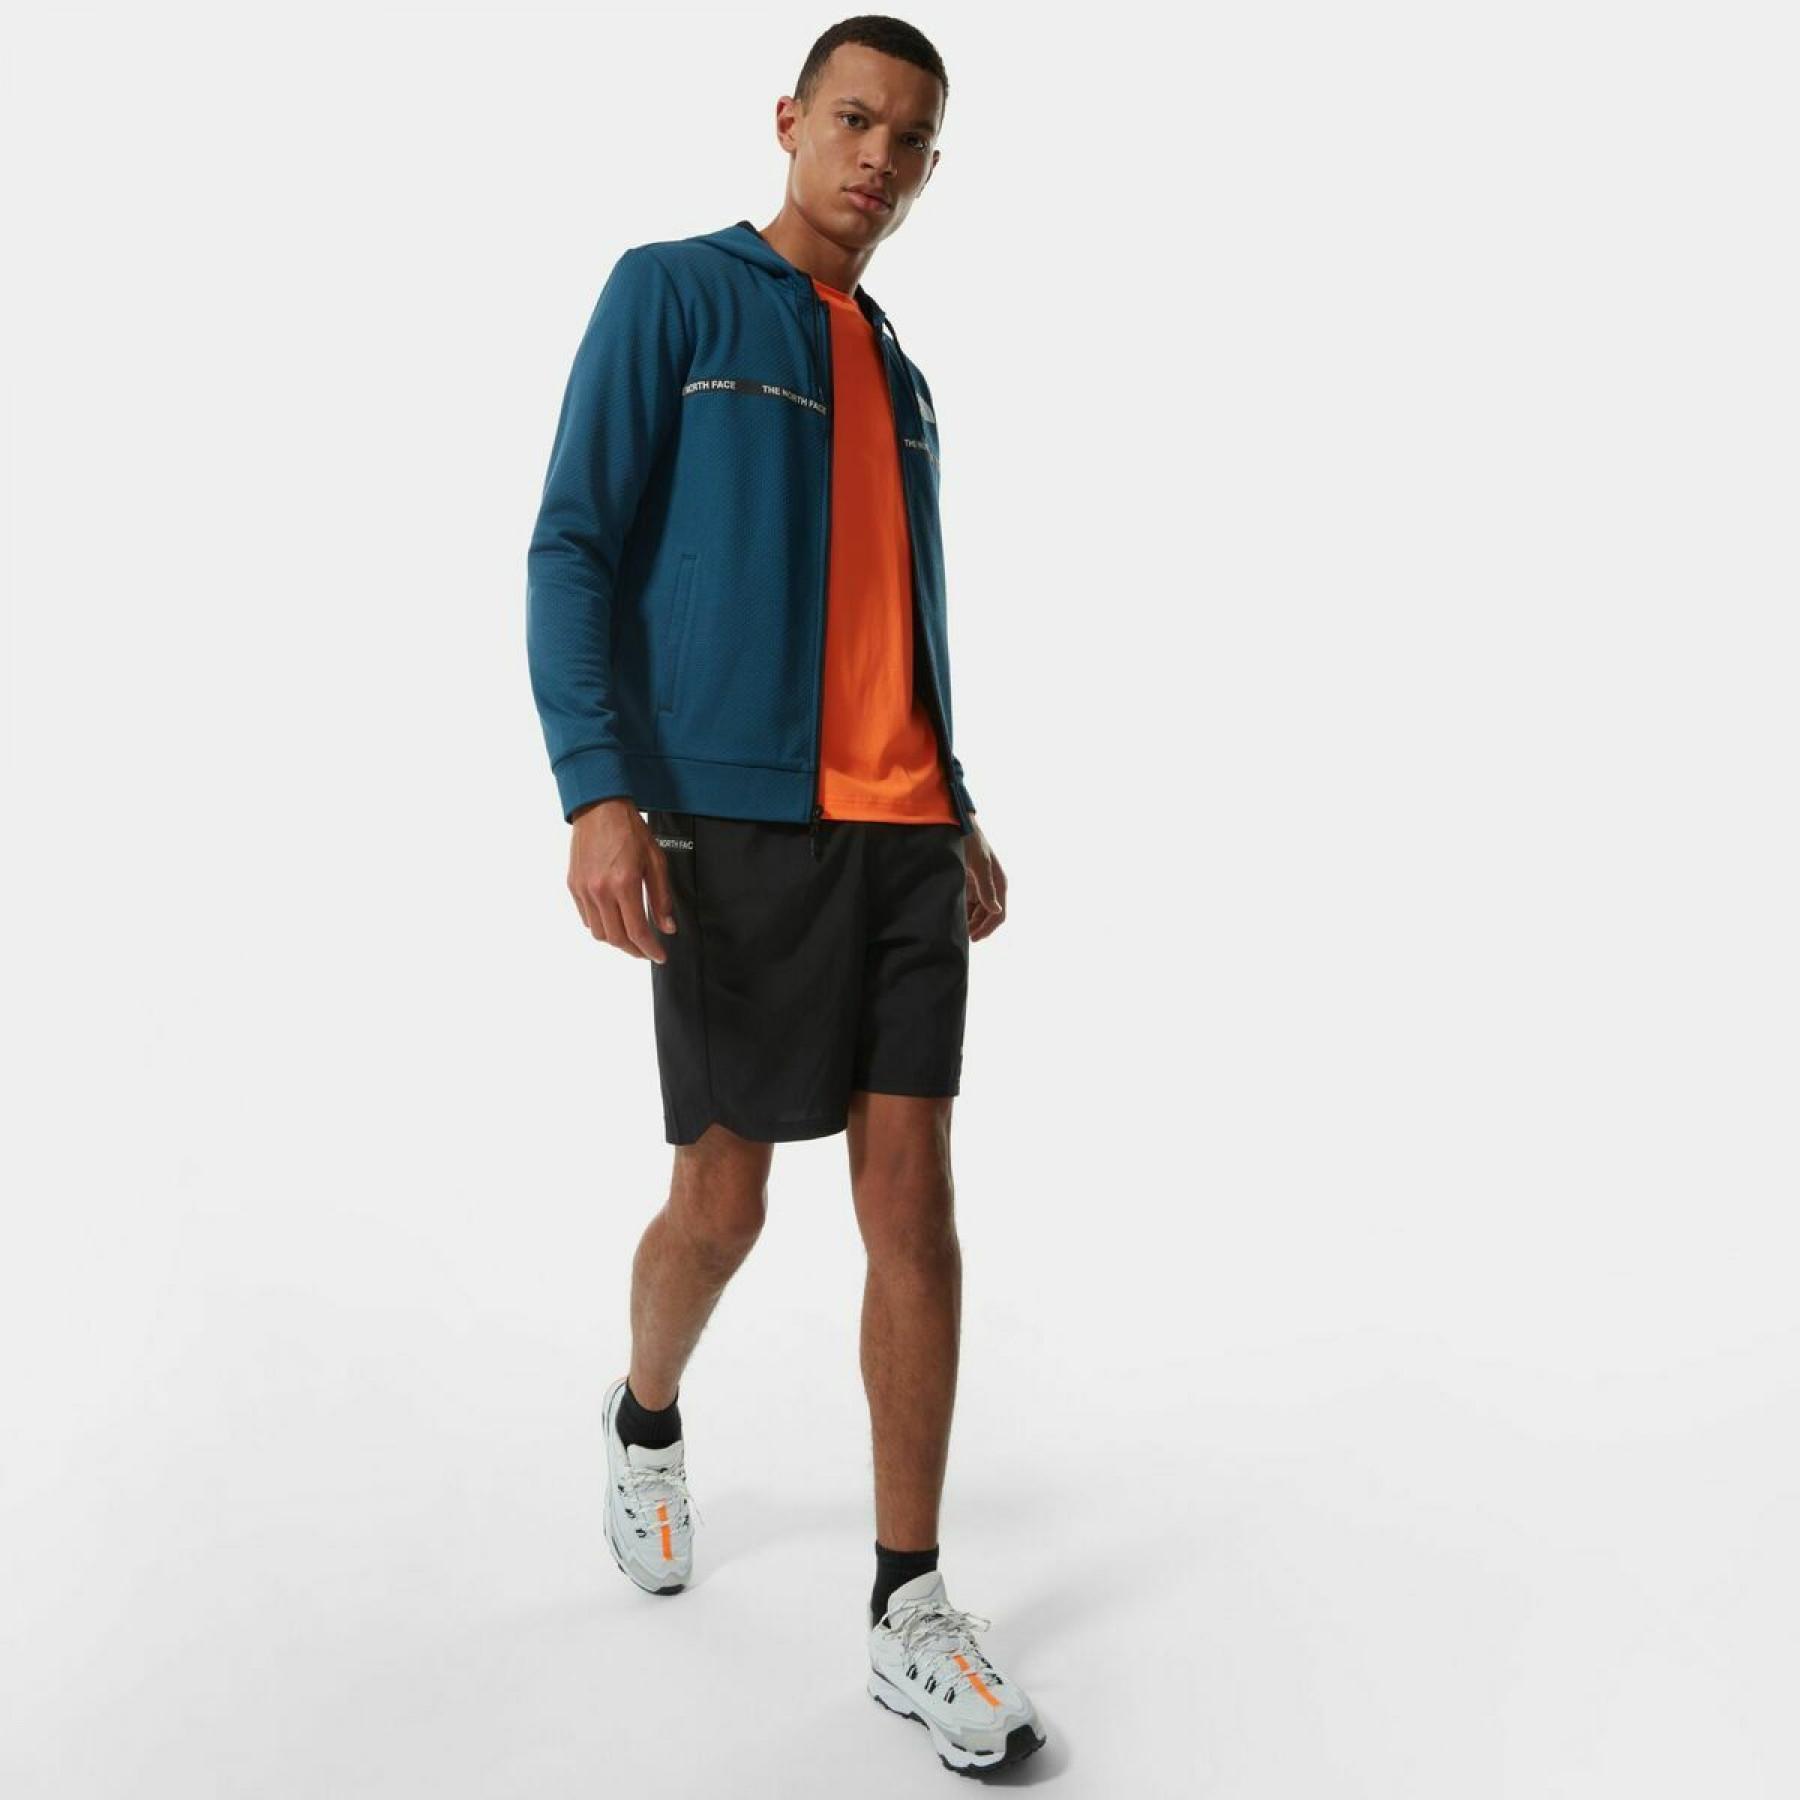 Jacket The North Face Overlay